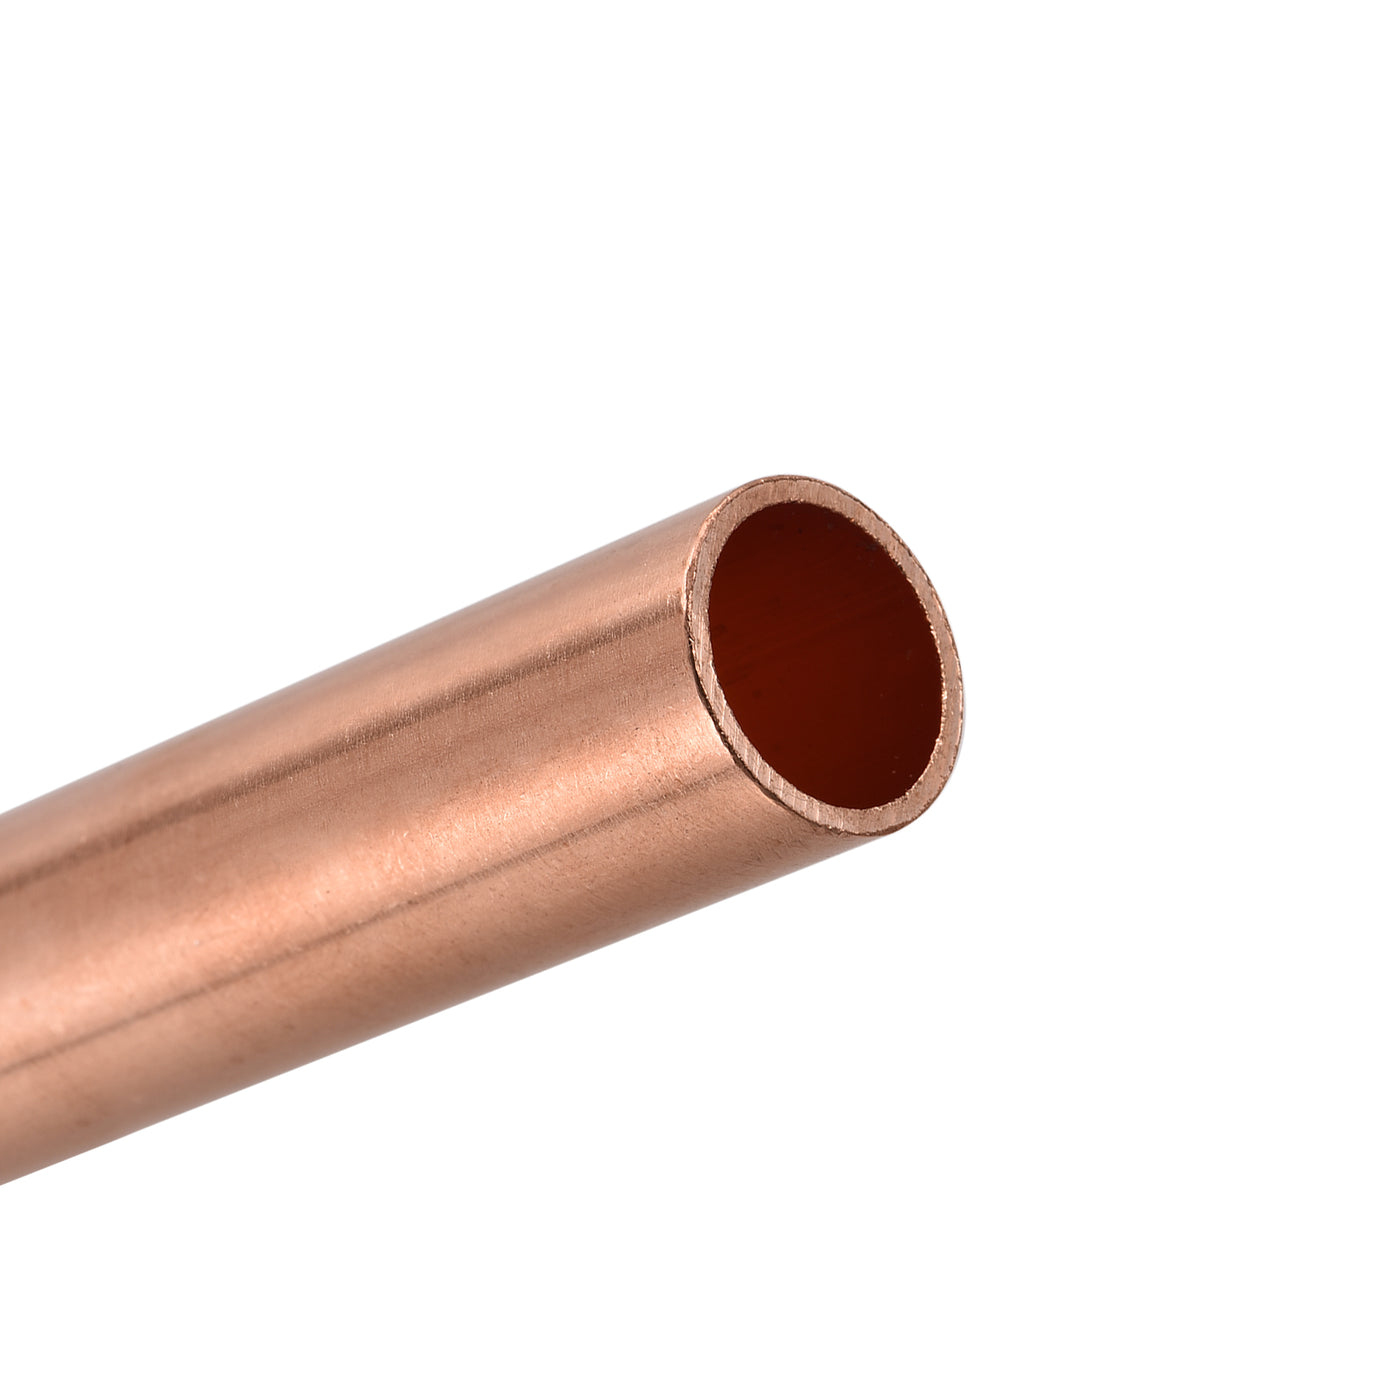 uxcell Uxcell Copper Round Tube 19mm OD 1.5mm Wall Thickness 100mm Length Pipe Tubing 2 Pcs